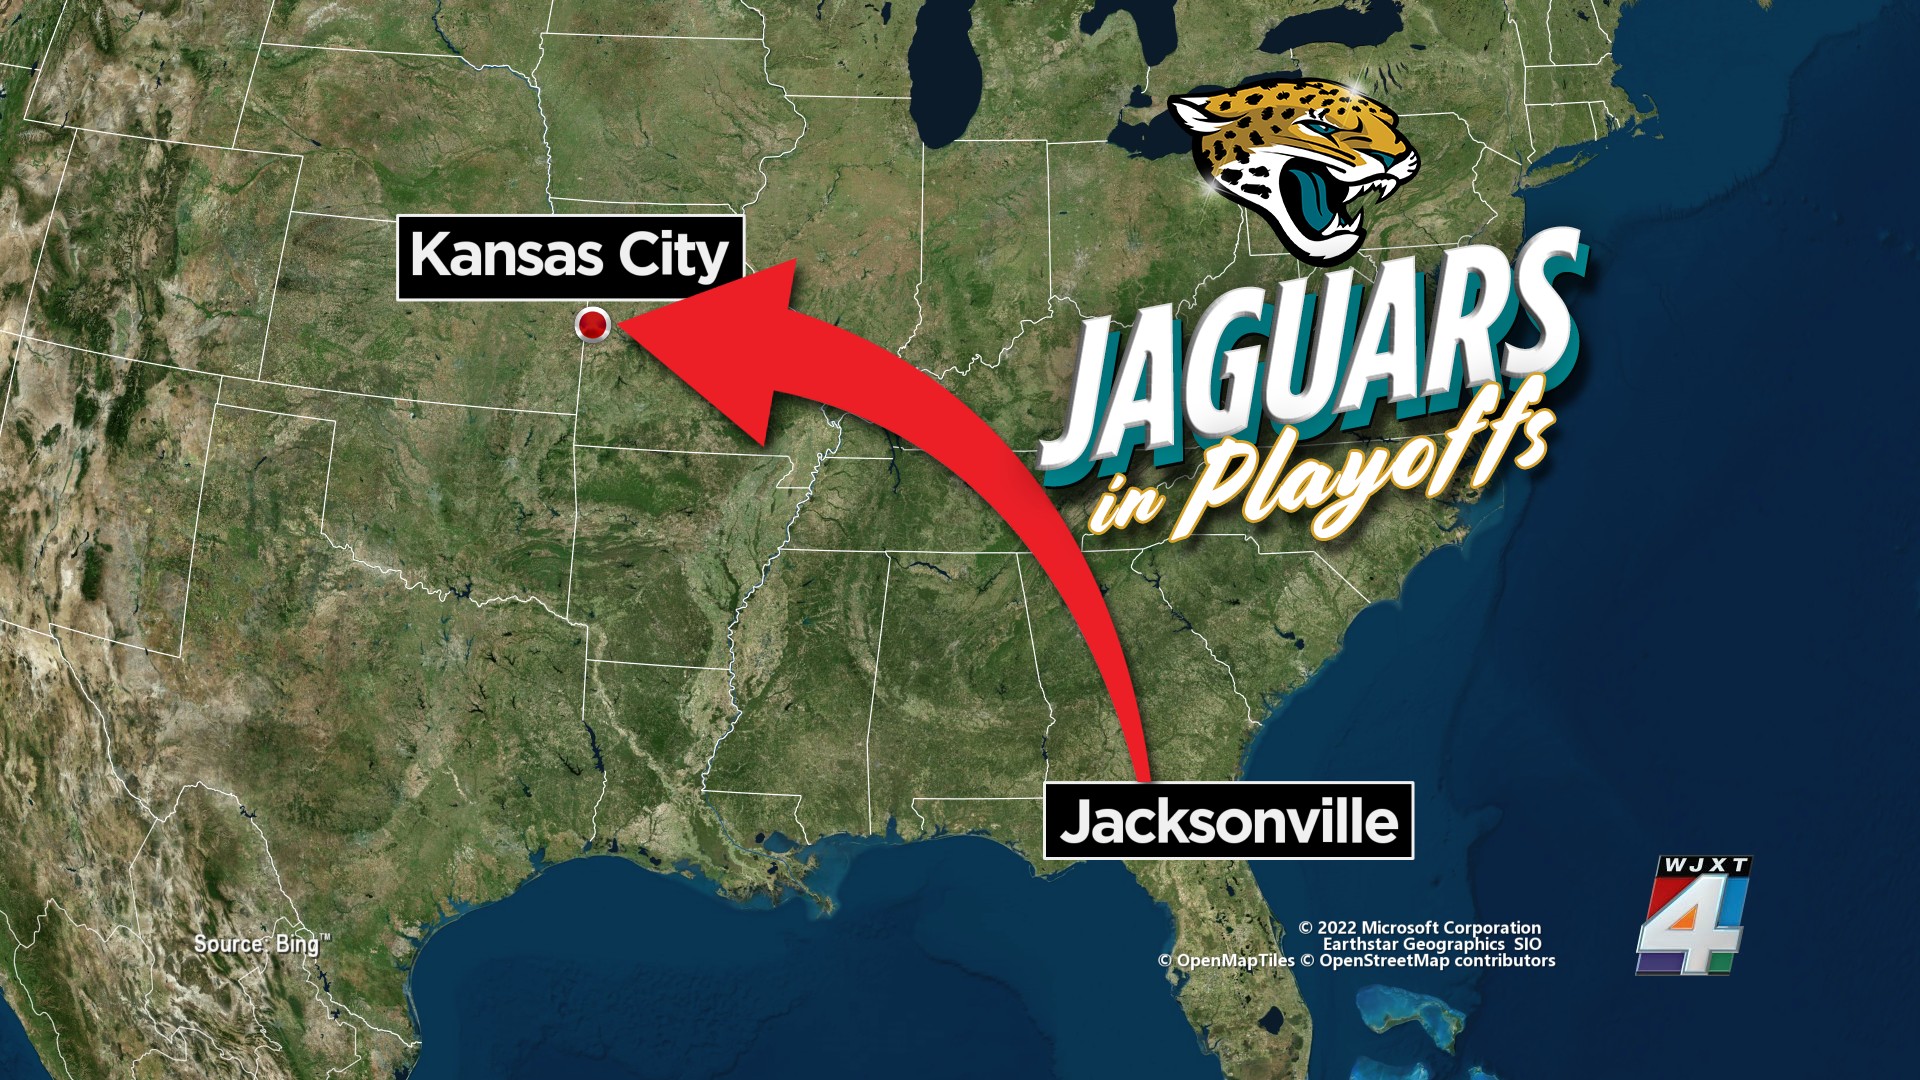 Jaguars superfan expects thousands will show up in Kansas City for